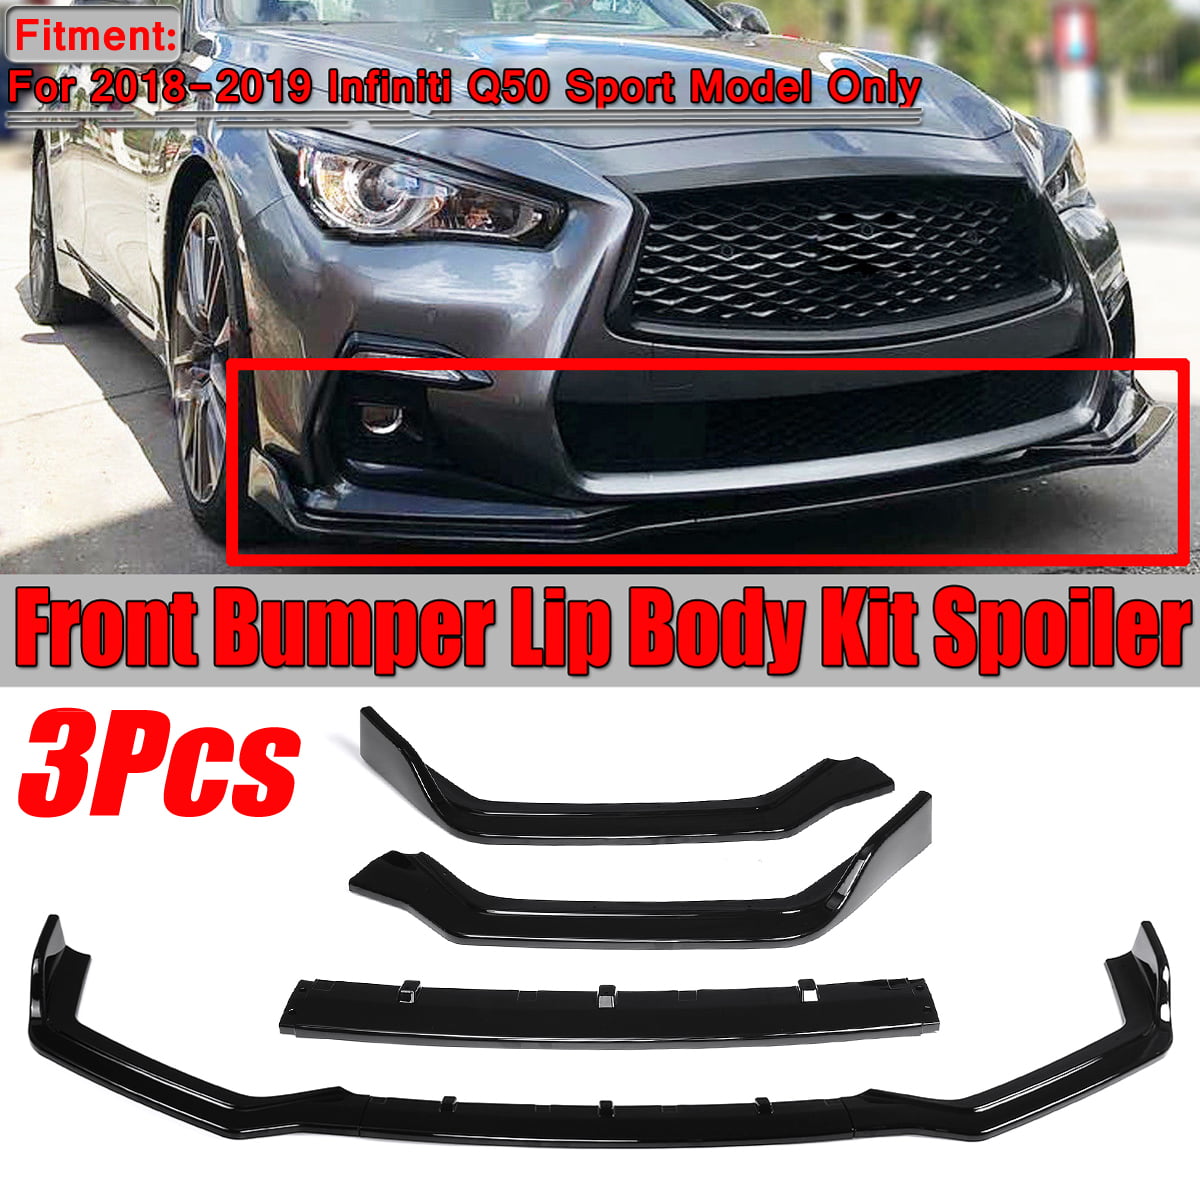 White EPARTS 3-Piece Front Bumper Lip Splitter Chin Spoiler Kit Compatible With 2018-2021 Infiniti Q50 Sport Model Only 